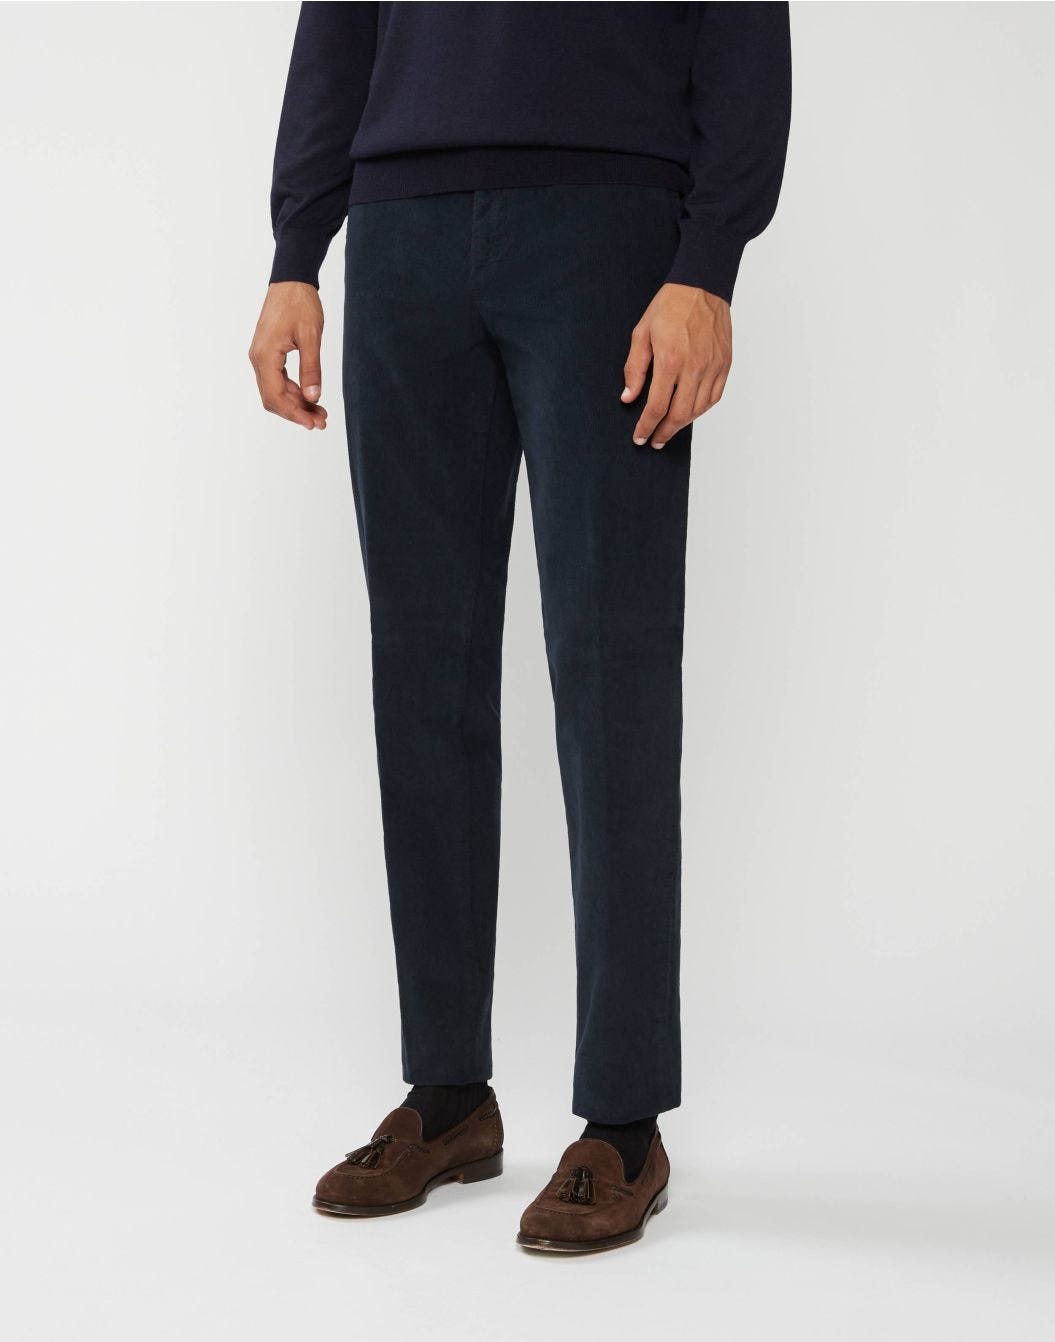 Chino pants in blue corduroy